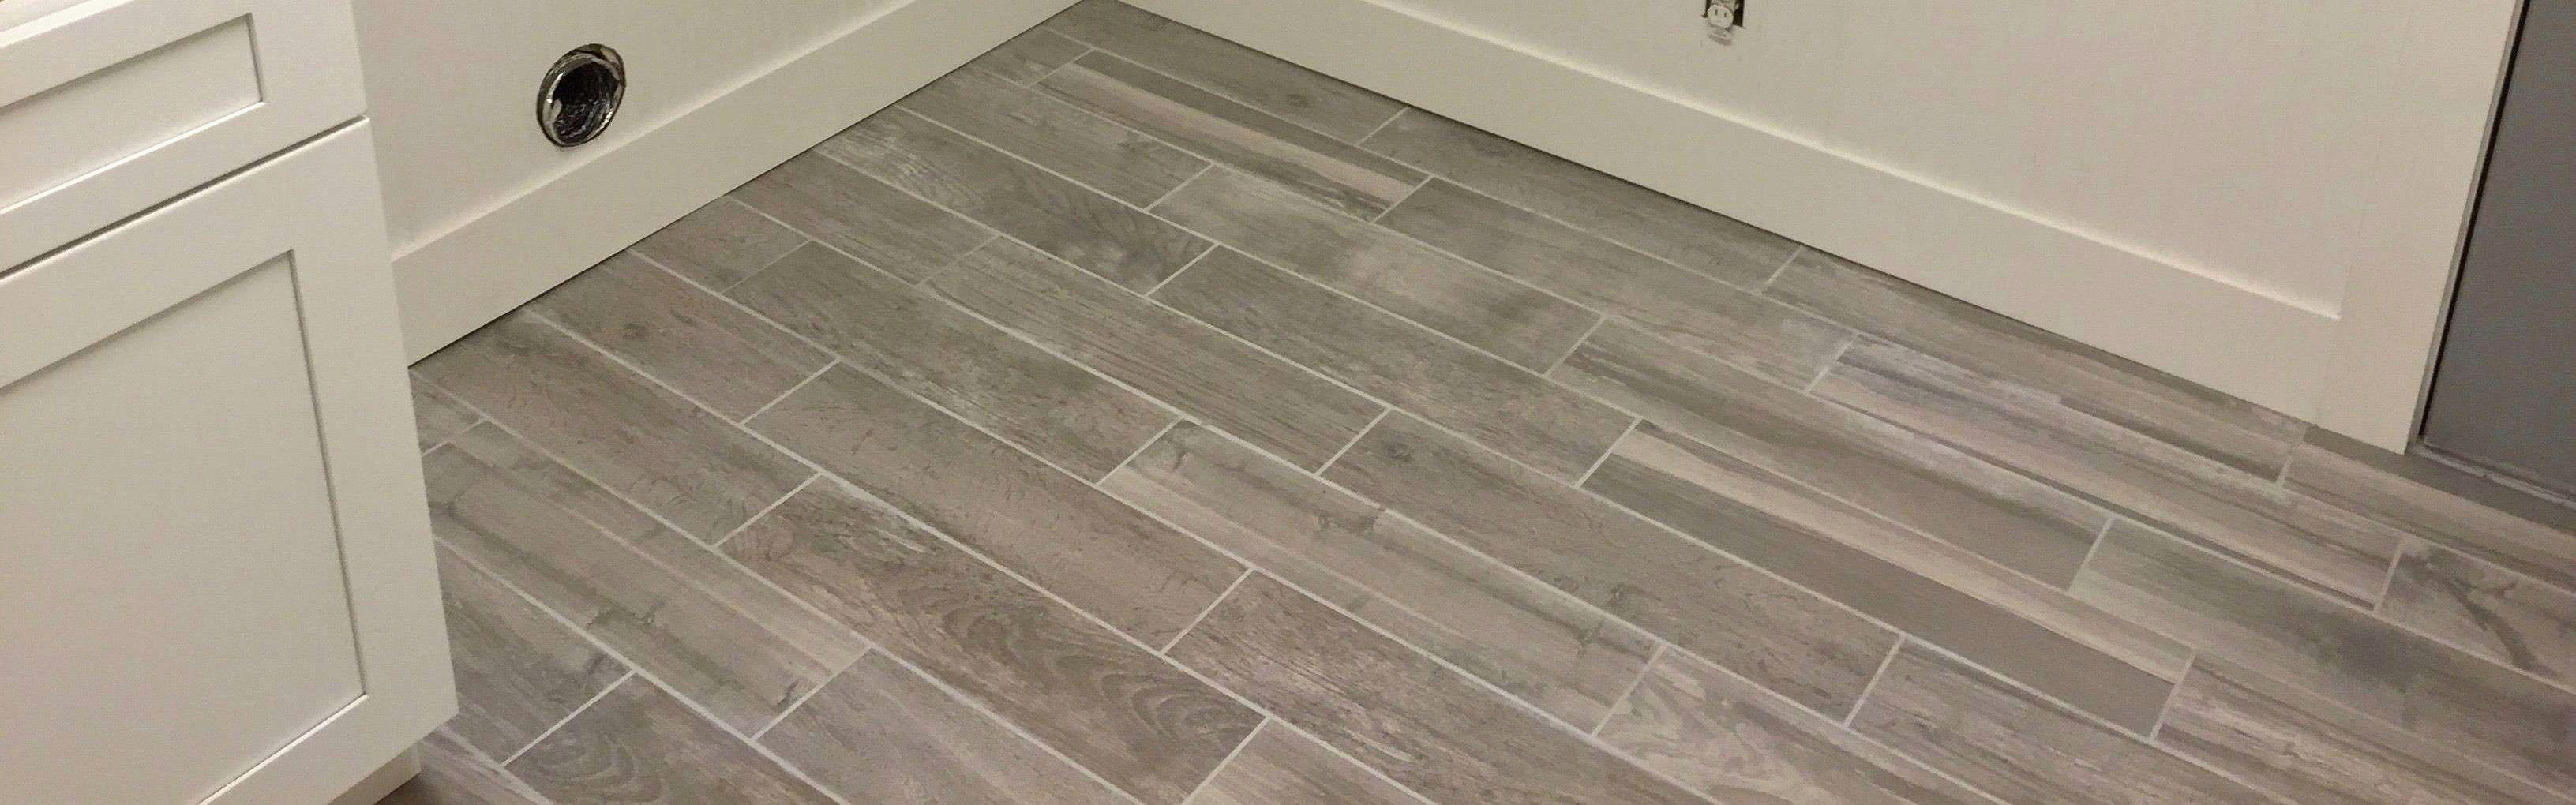 11 attractive Hardwood Tile Flooring Reviews 2024 free download hardwood tile flooring reviews of 25 beneficial wood look tile flooring photos peritile for unique bathroom tiling ideas best h sink install bathroom i 0d exciting beautiful fresh bathroom f